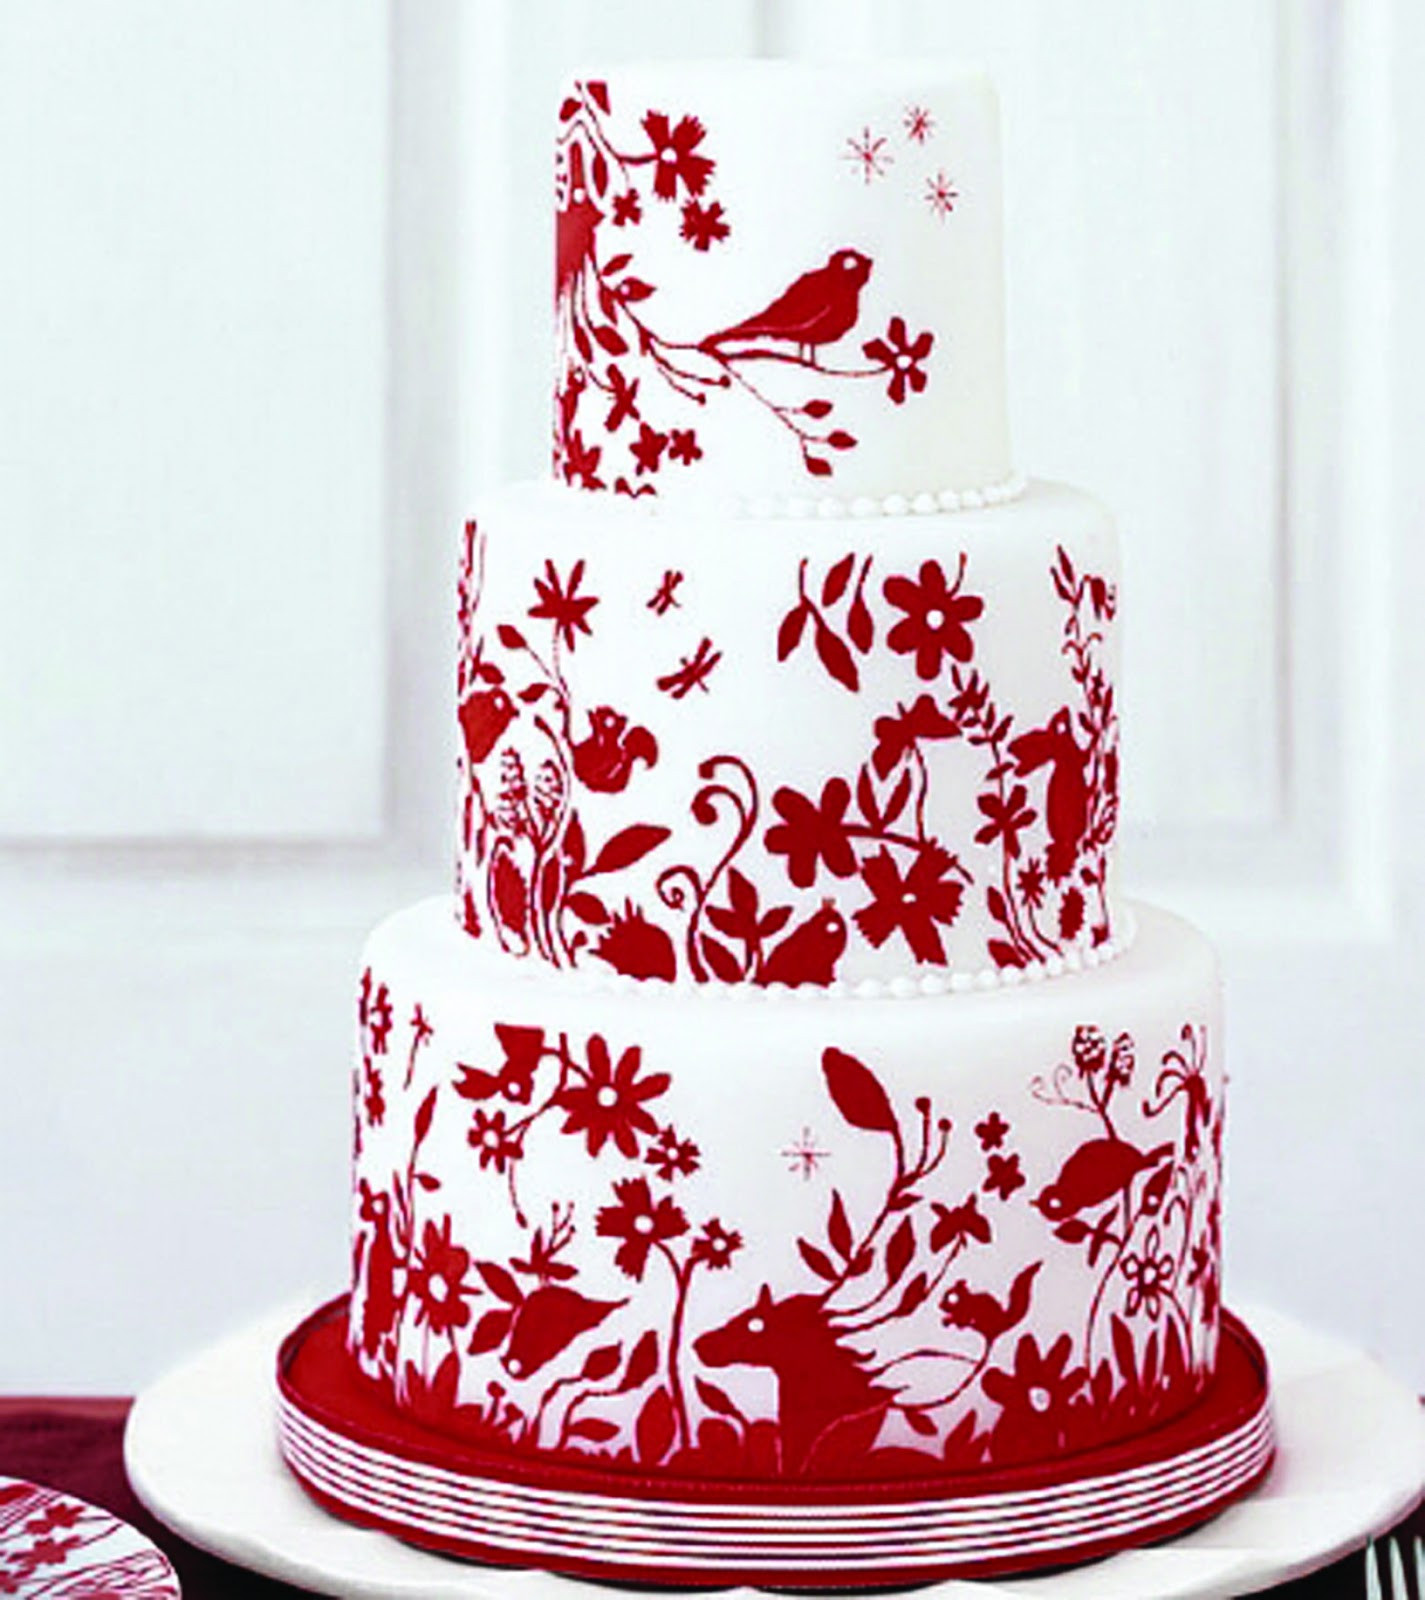 Red And White Wedding Cakes
 I am a Woman in Love Awesome and Original Wedding Cakes